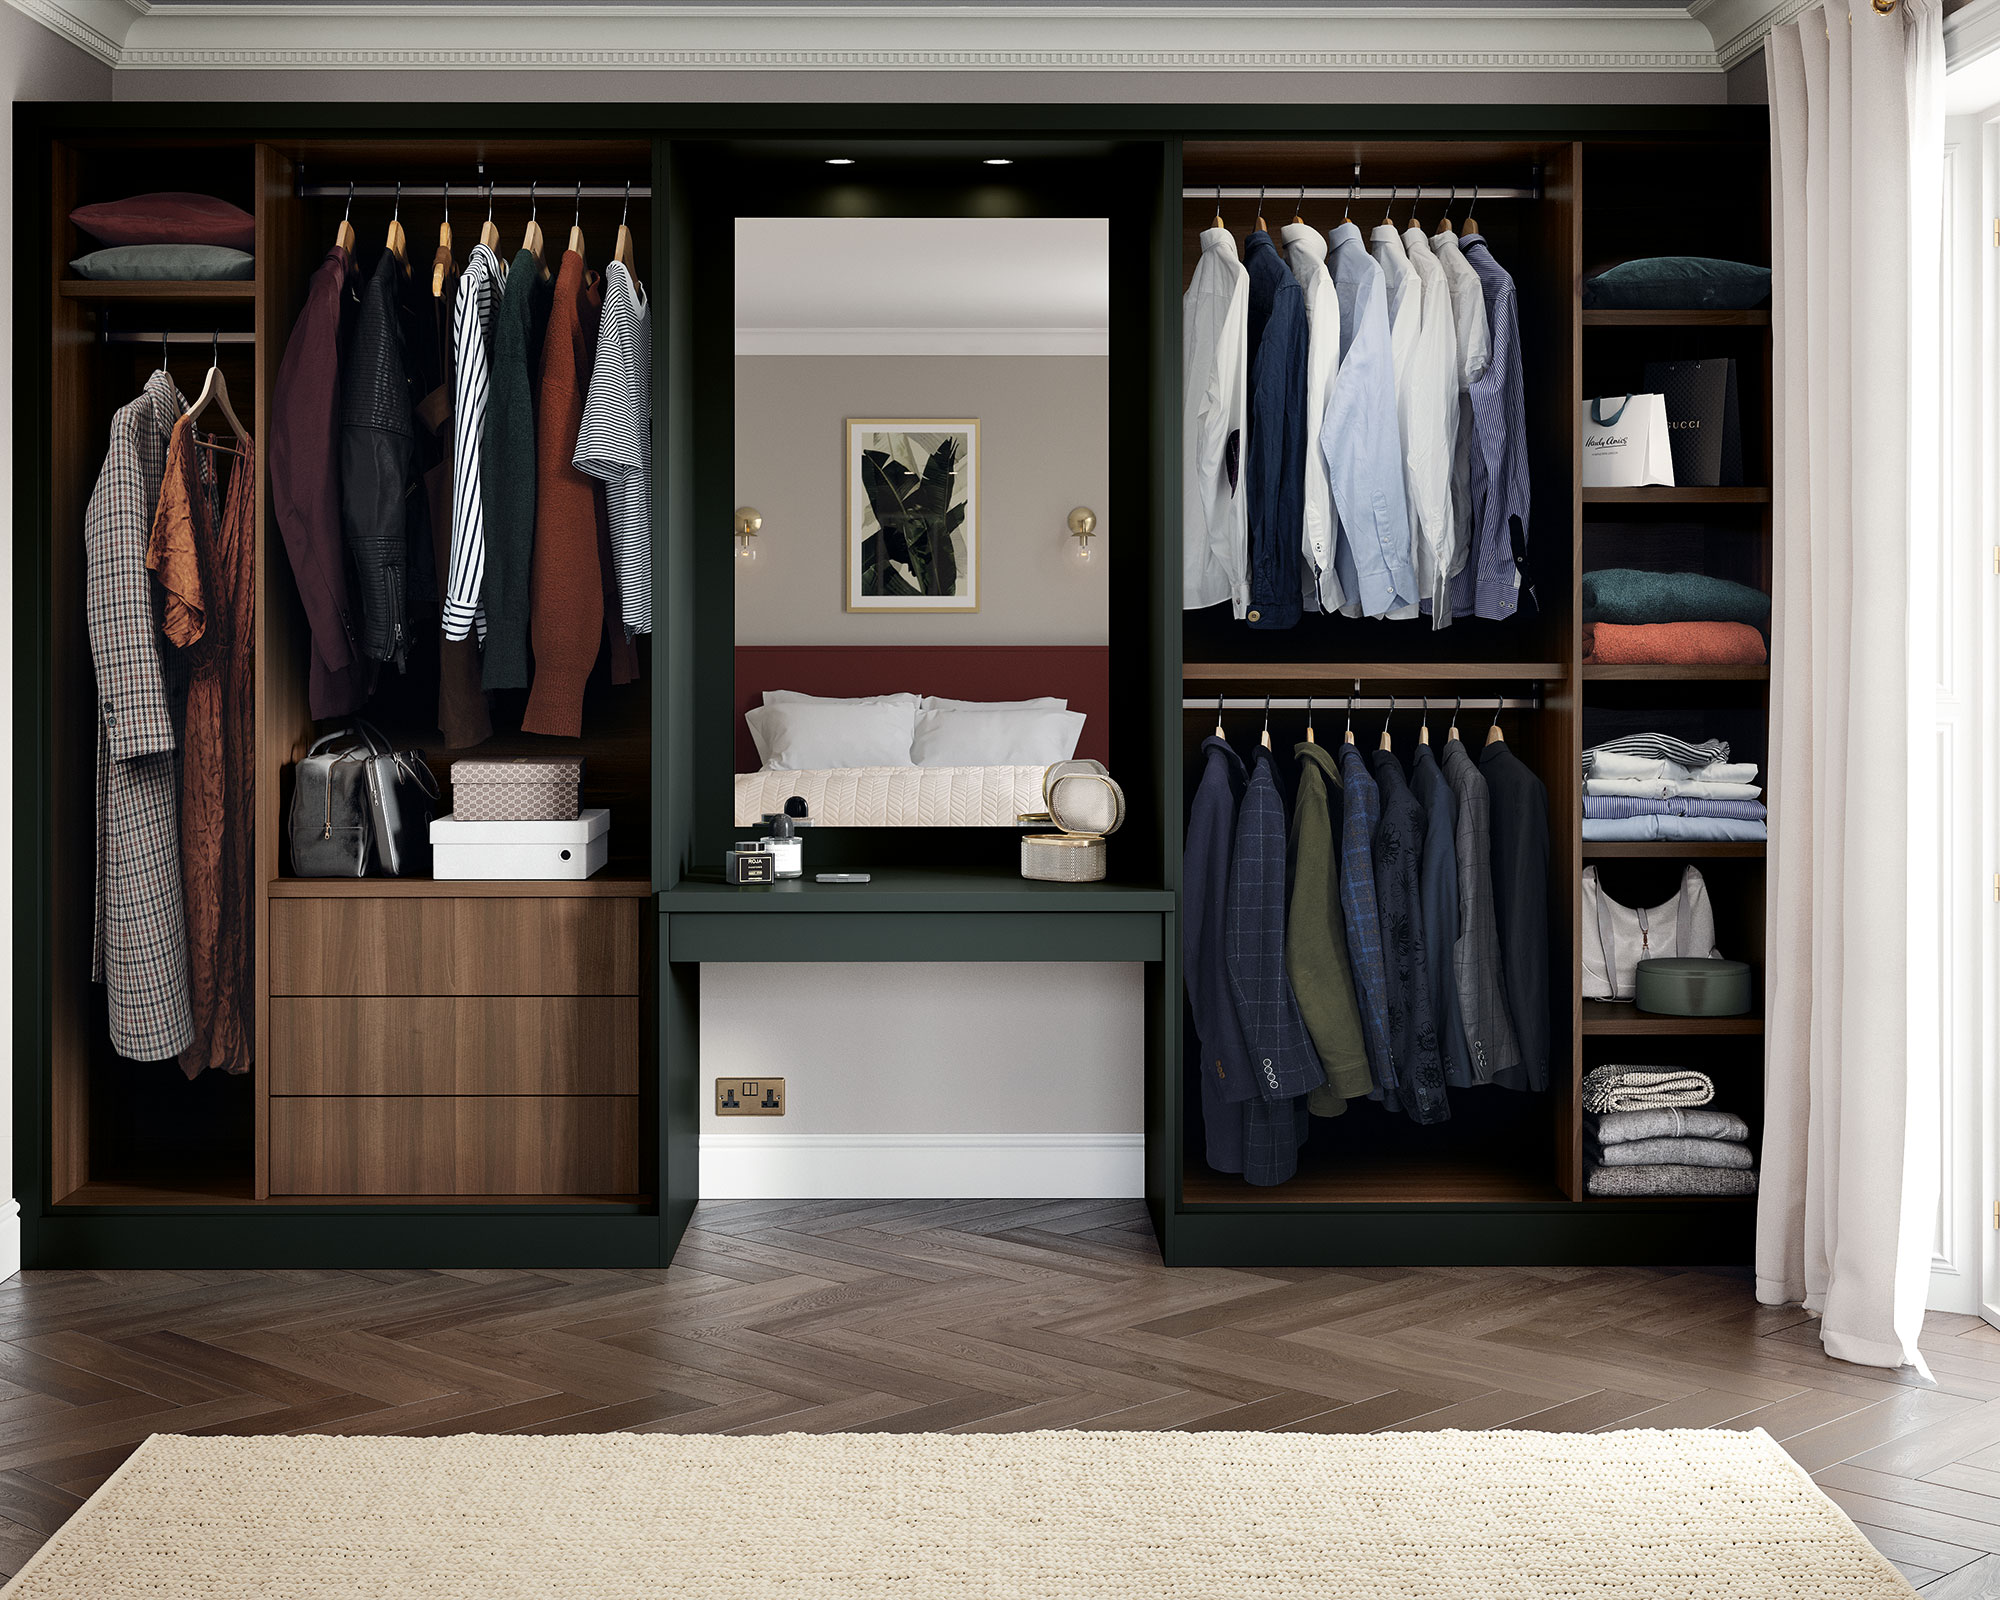 Open walk-in closet ideas in black with wooden flooring and white drapes.